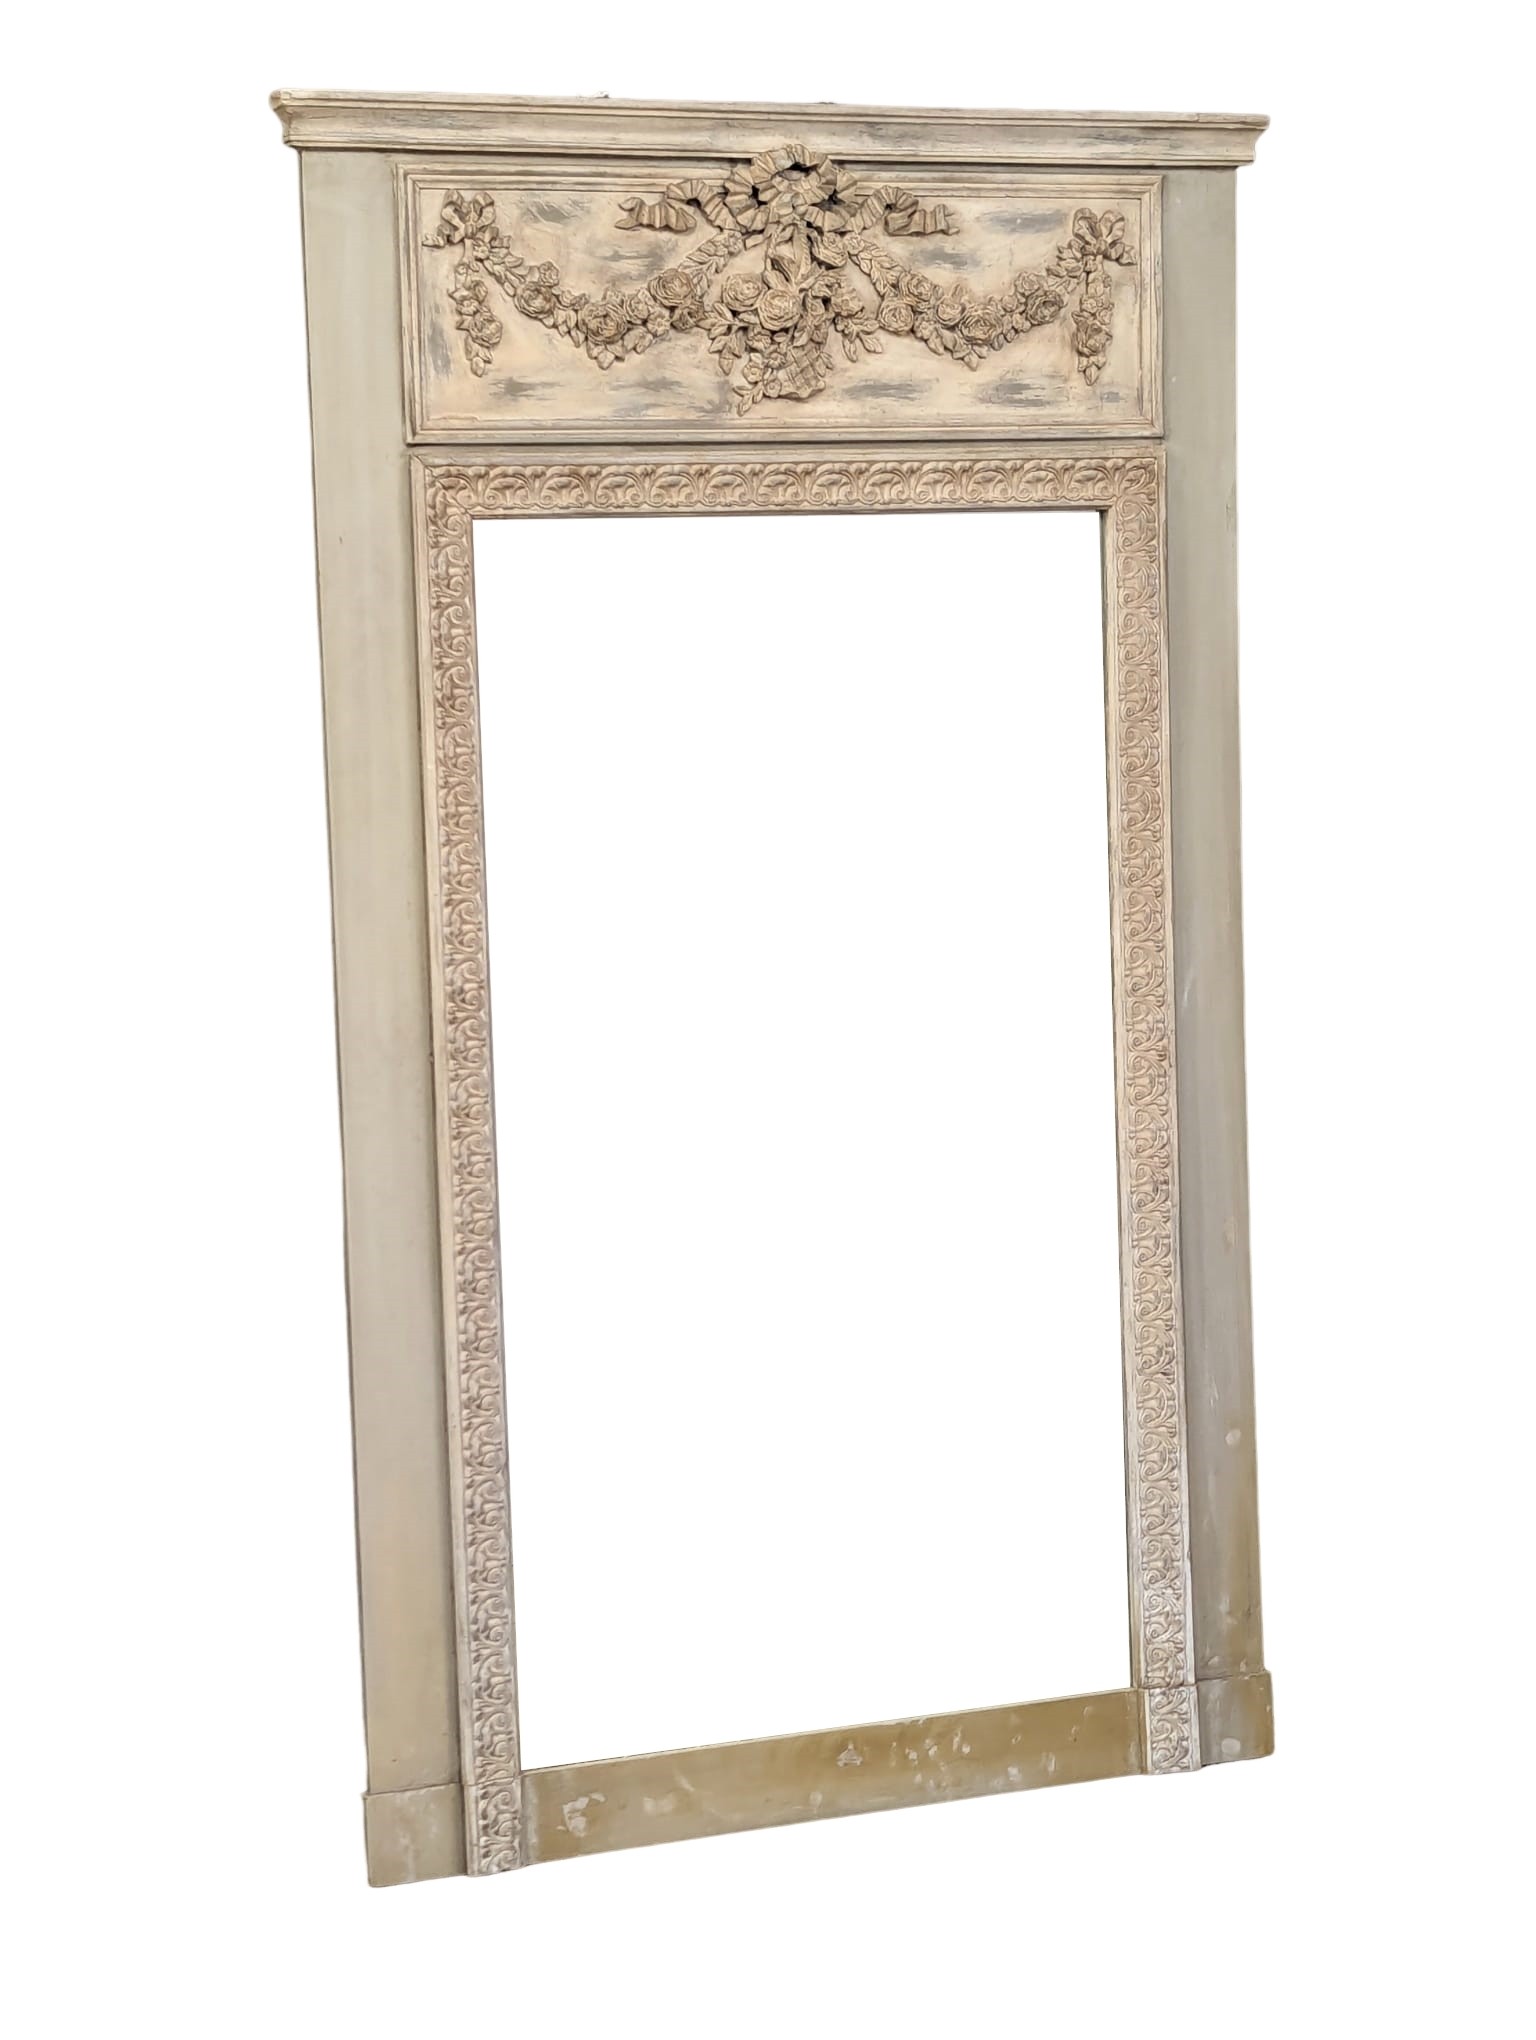 A large French 18th Century style floor mirror. 116x192cm